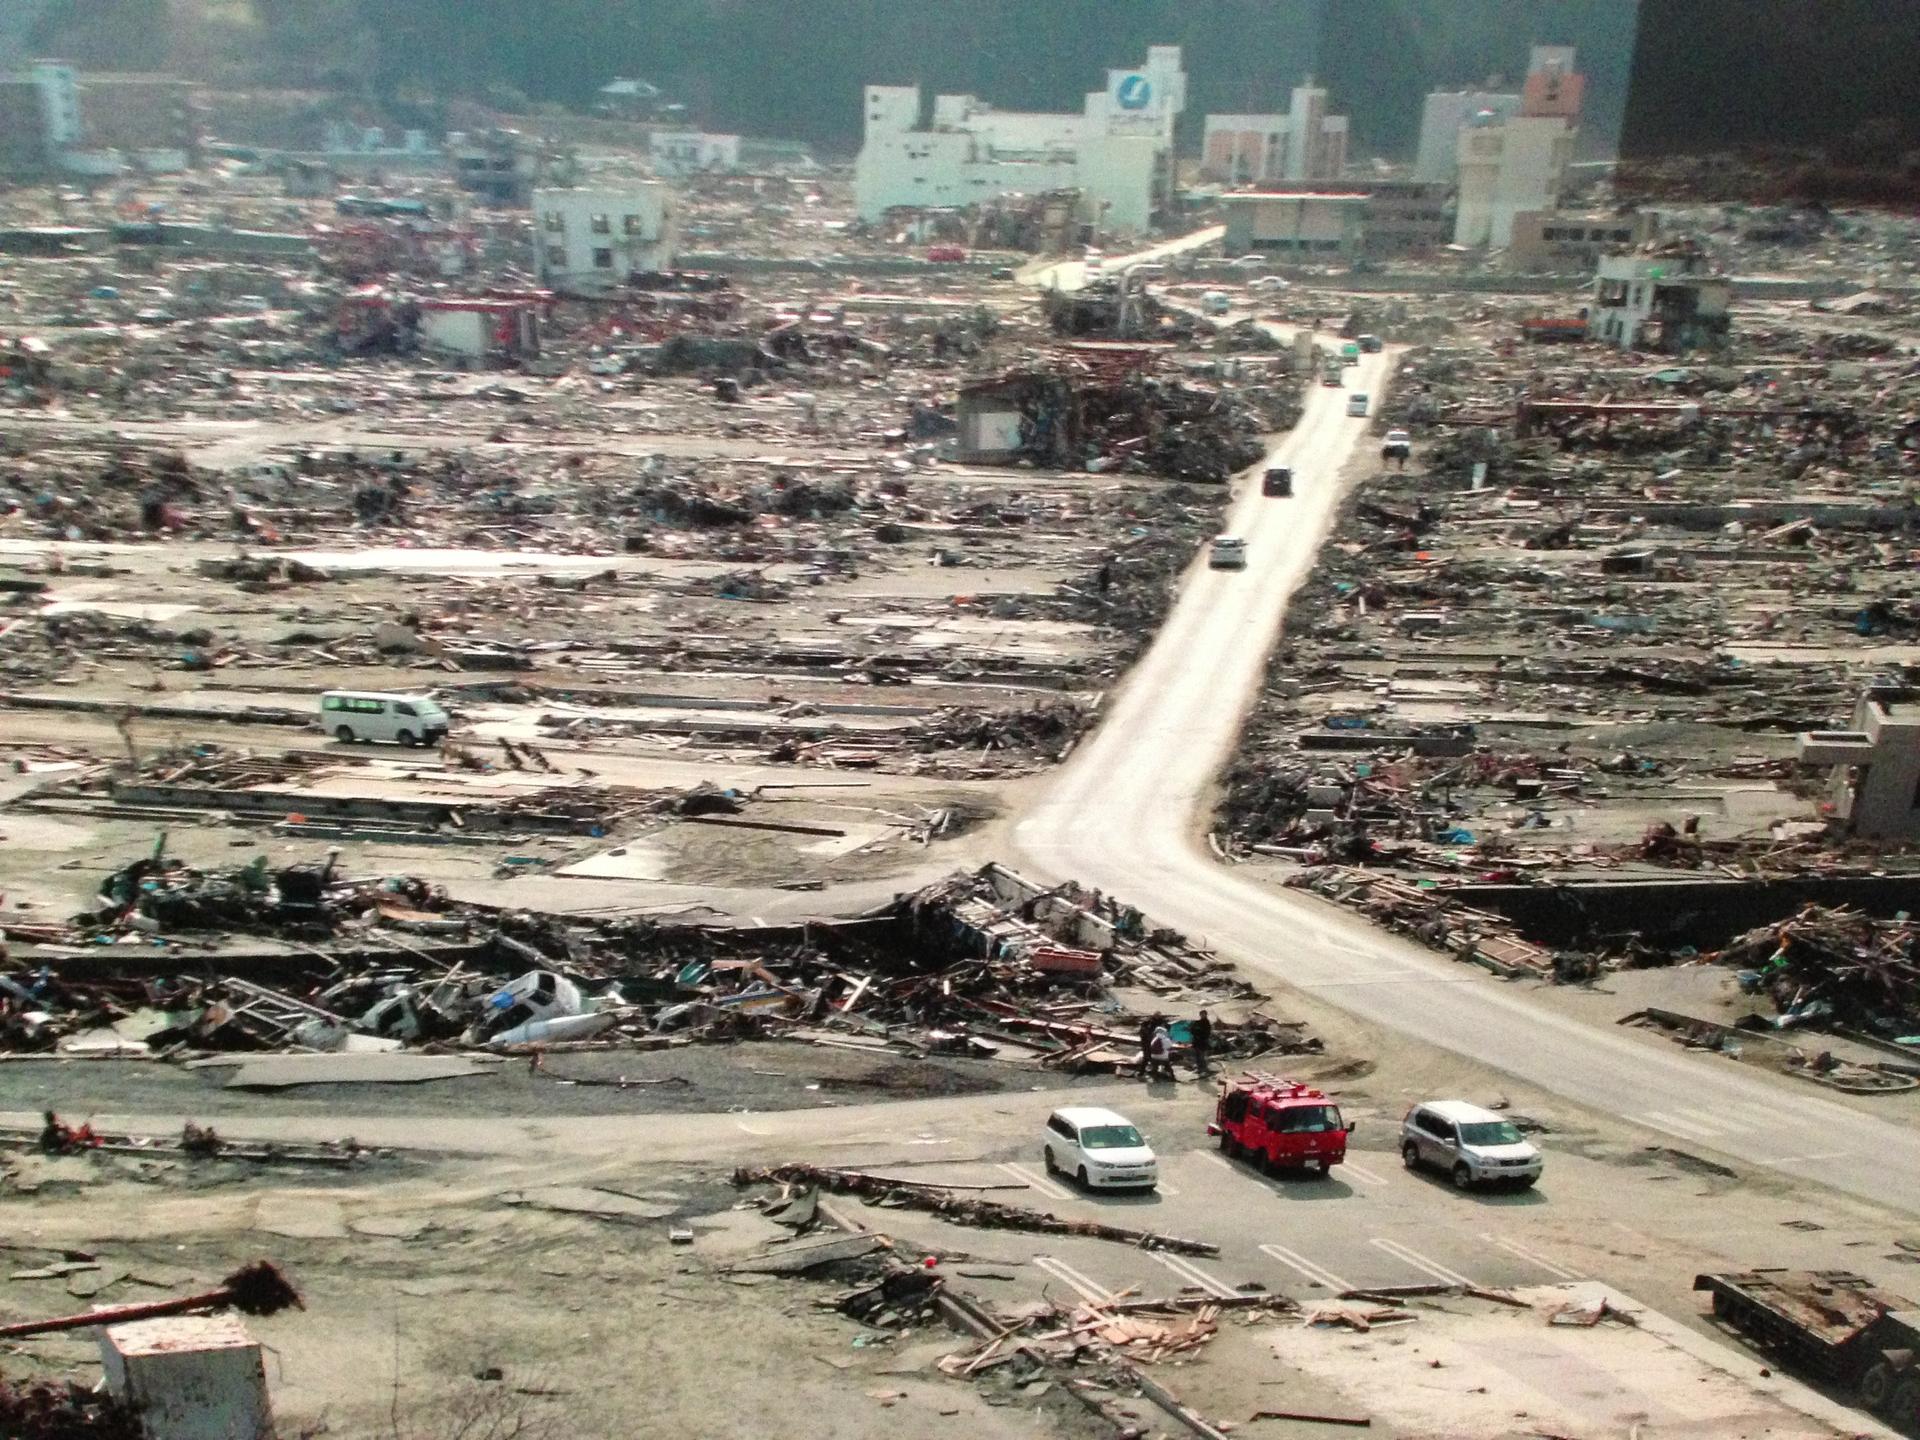 The Japanese town of Minamisanriku in the Miyagi Prefecture was destroyed by the 2011 tsunami. 